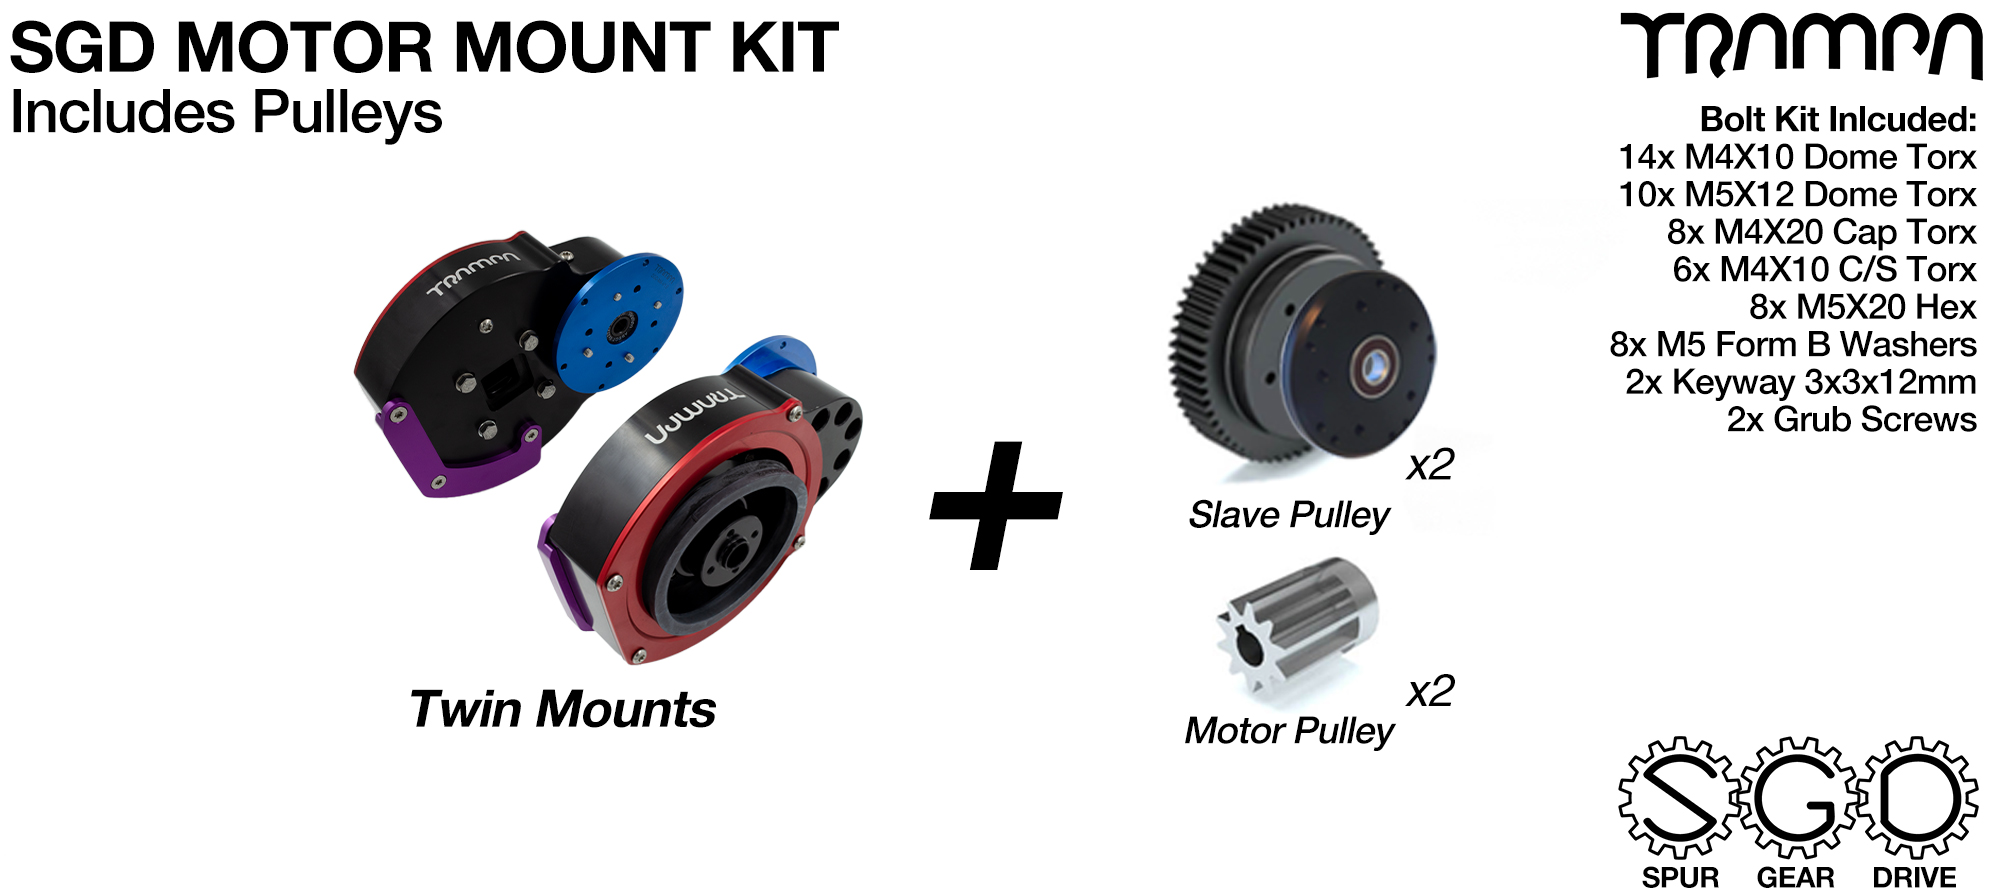 Mountainboard Spur Gear Drive TWIN Motor Mount with PULLEYs - NO Motor, NO Filters 